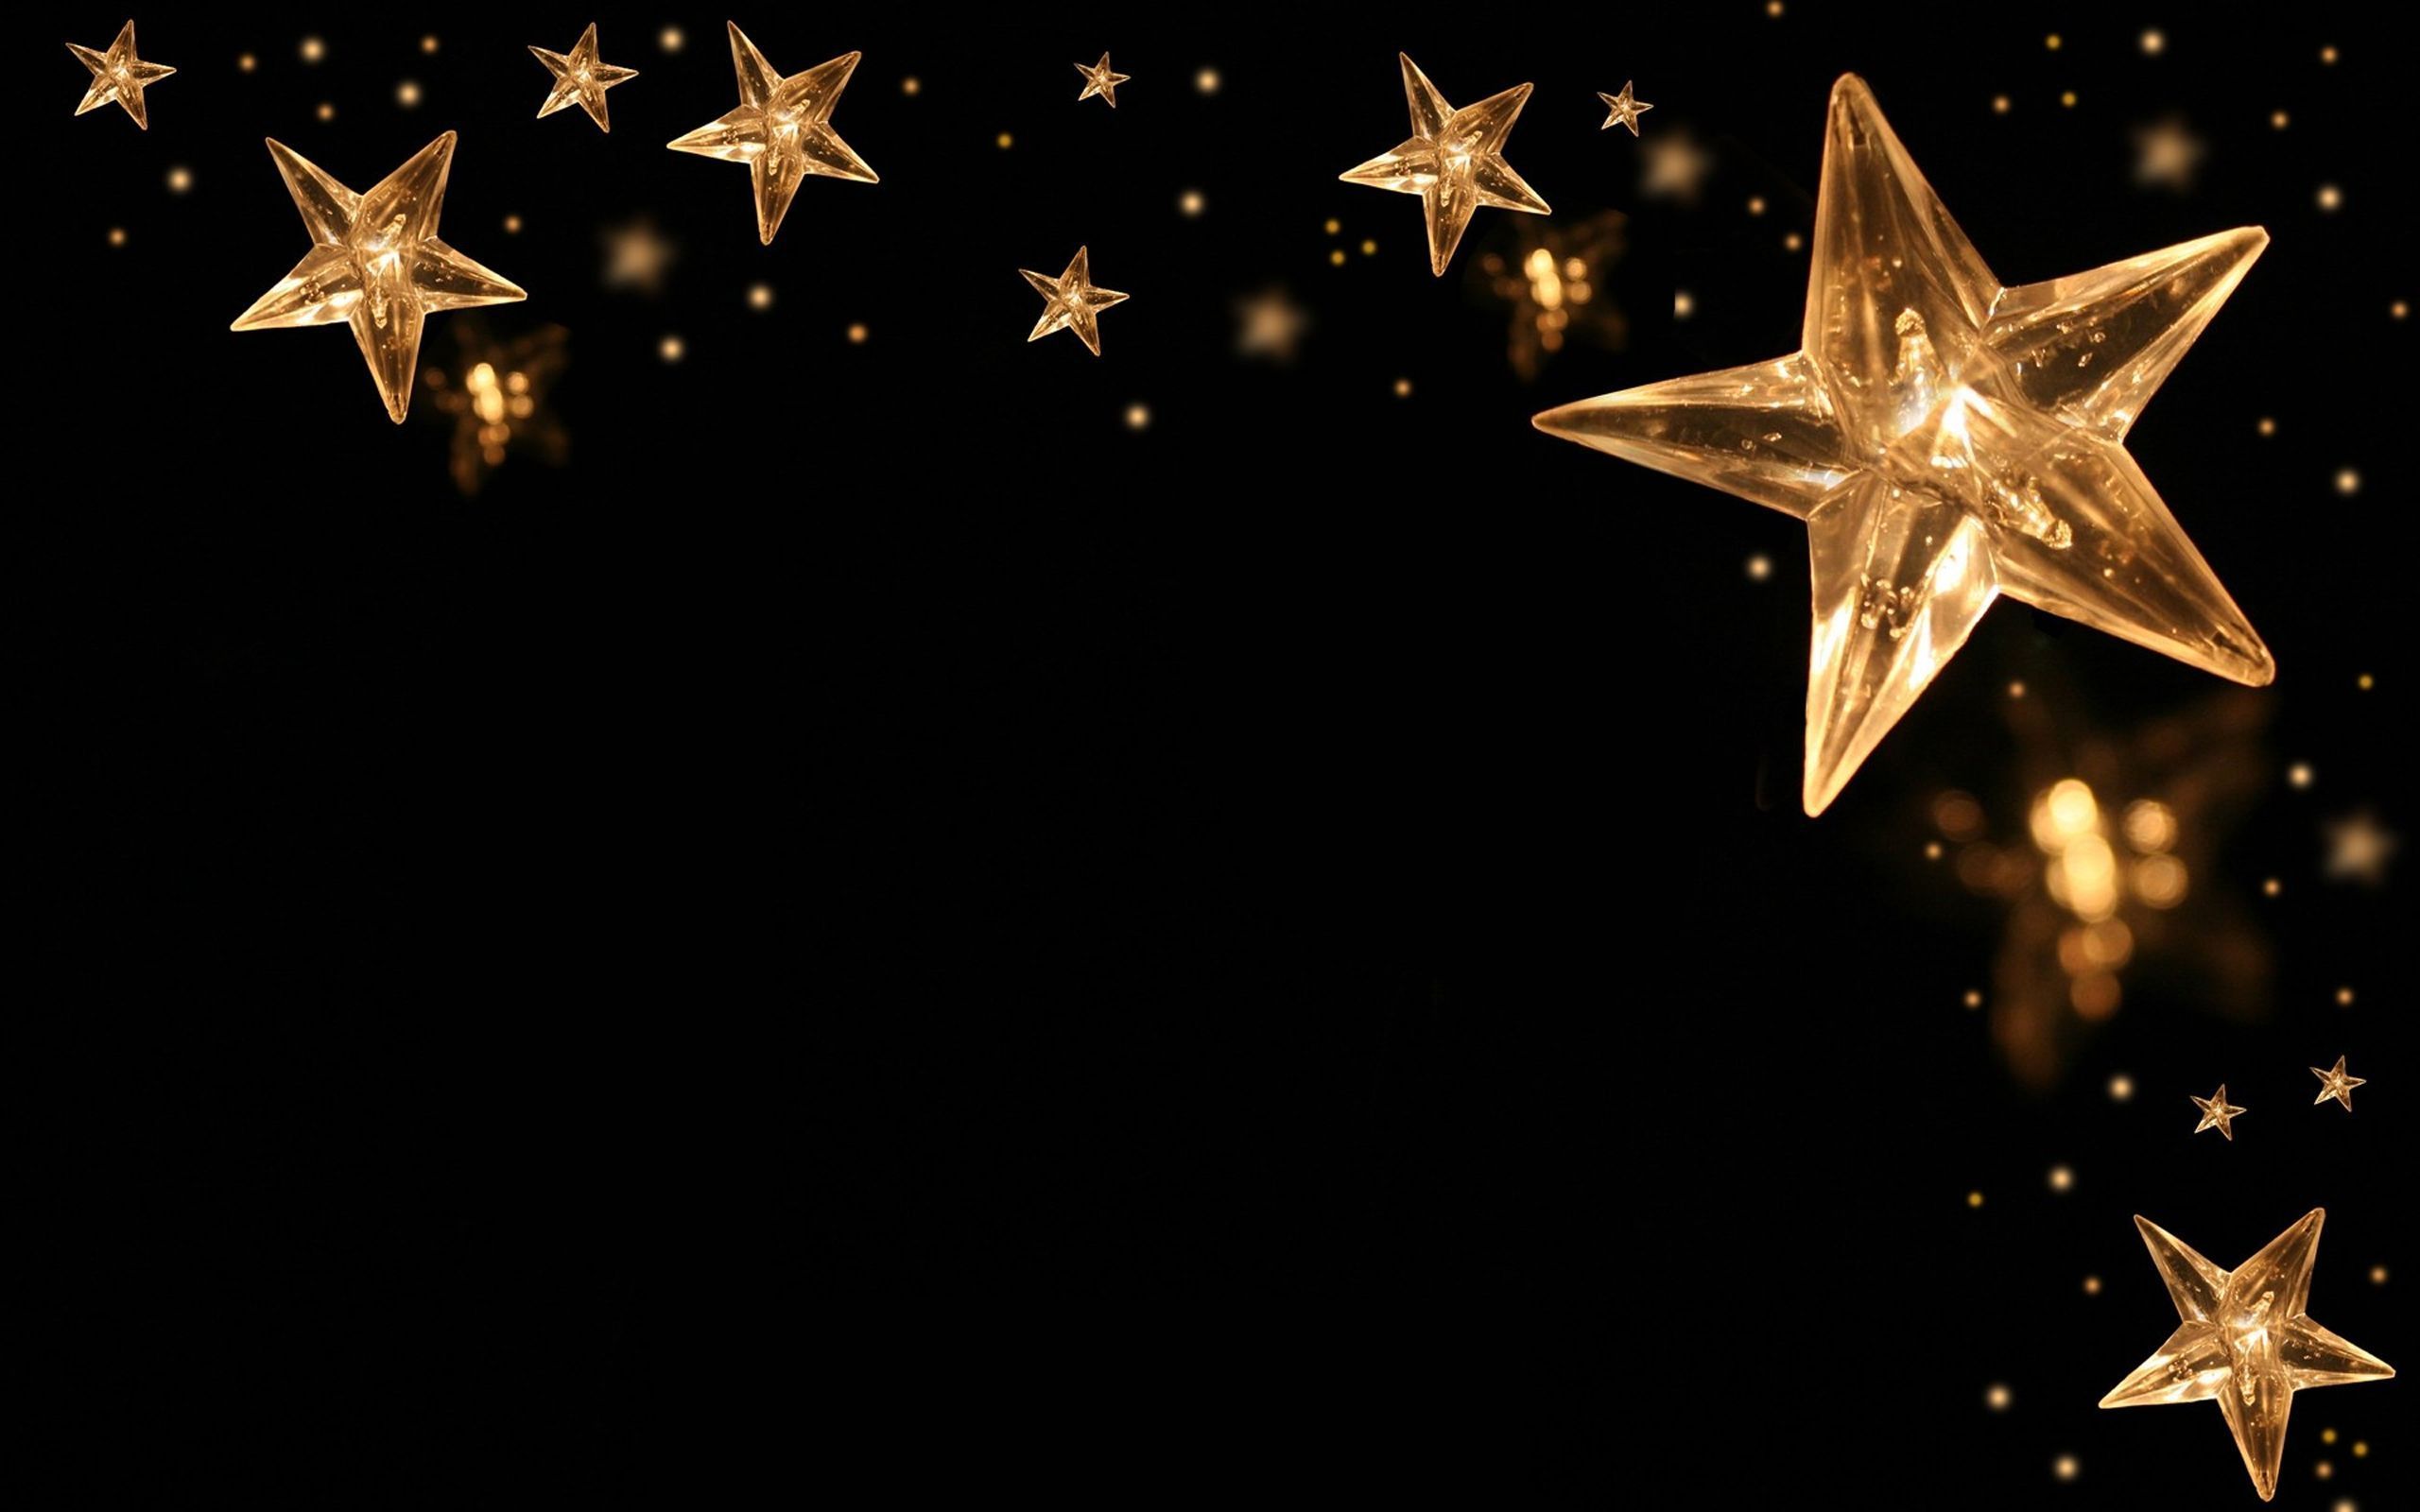 Golden-Stars-Wallpaper-Abstract-Image-Background-Picture.jpg